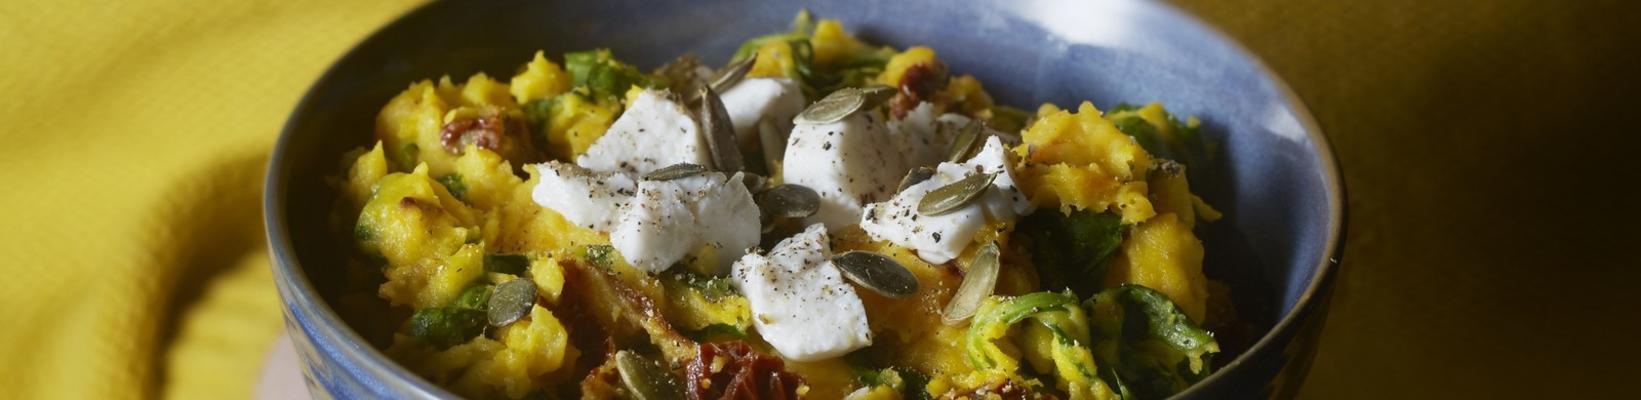 pumpkin stew with spinach and goat's cheese